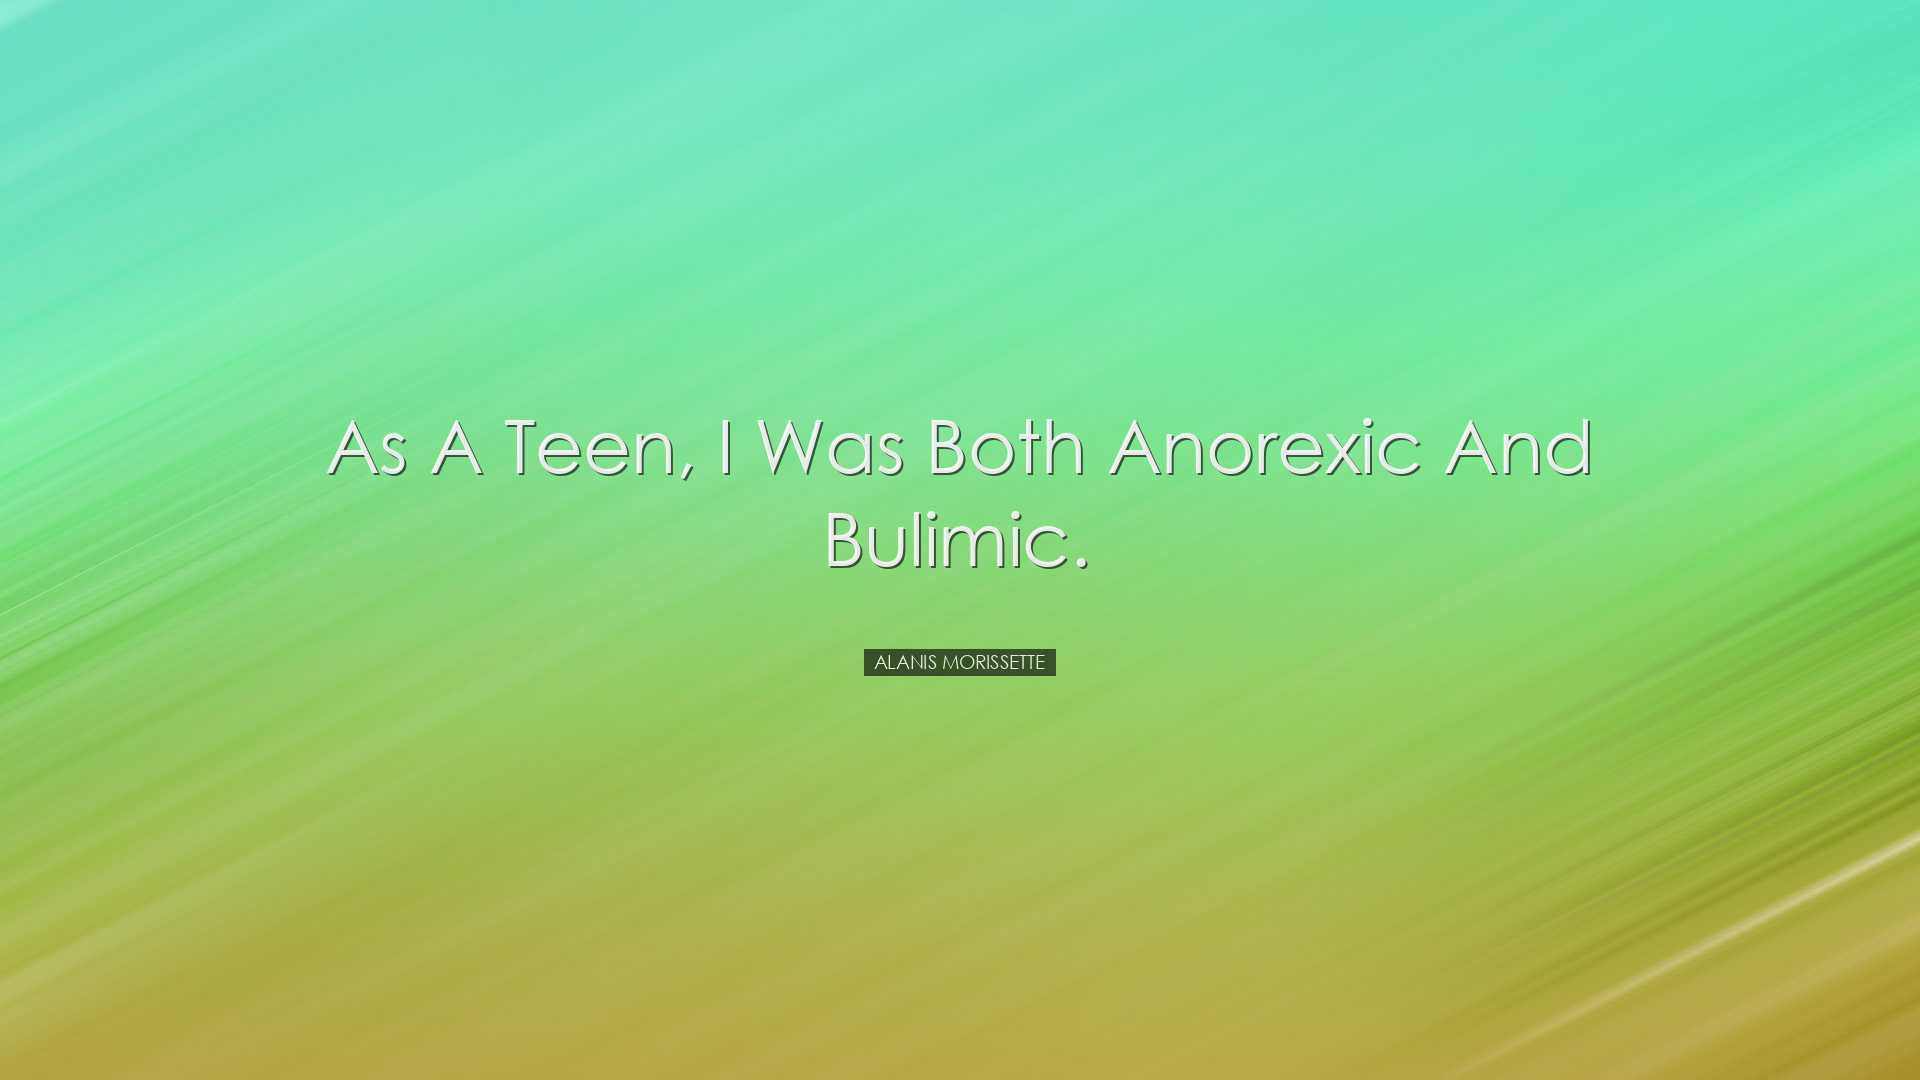 As a teen, I was both anorexic and bulimic. - Alanis Morissette